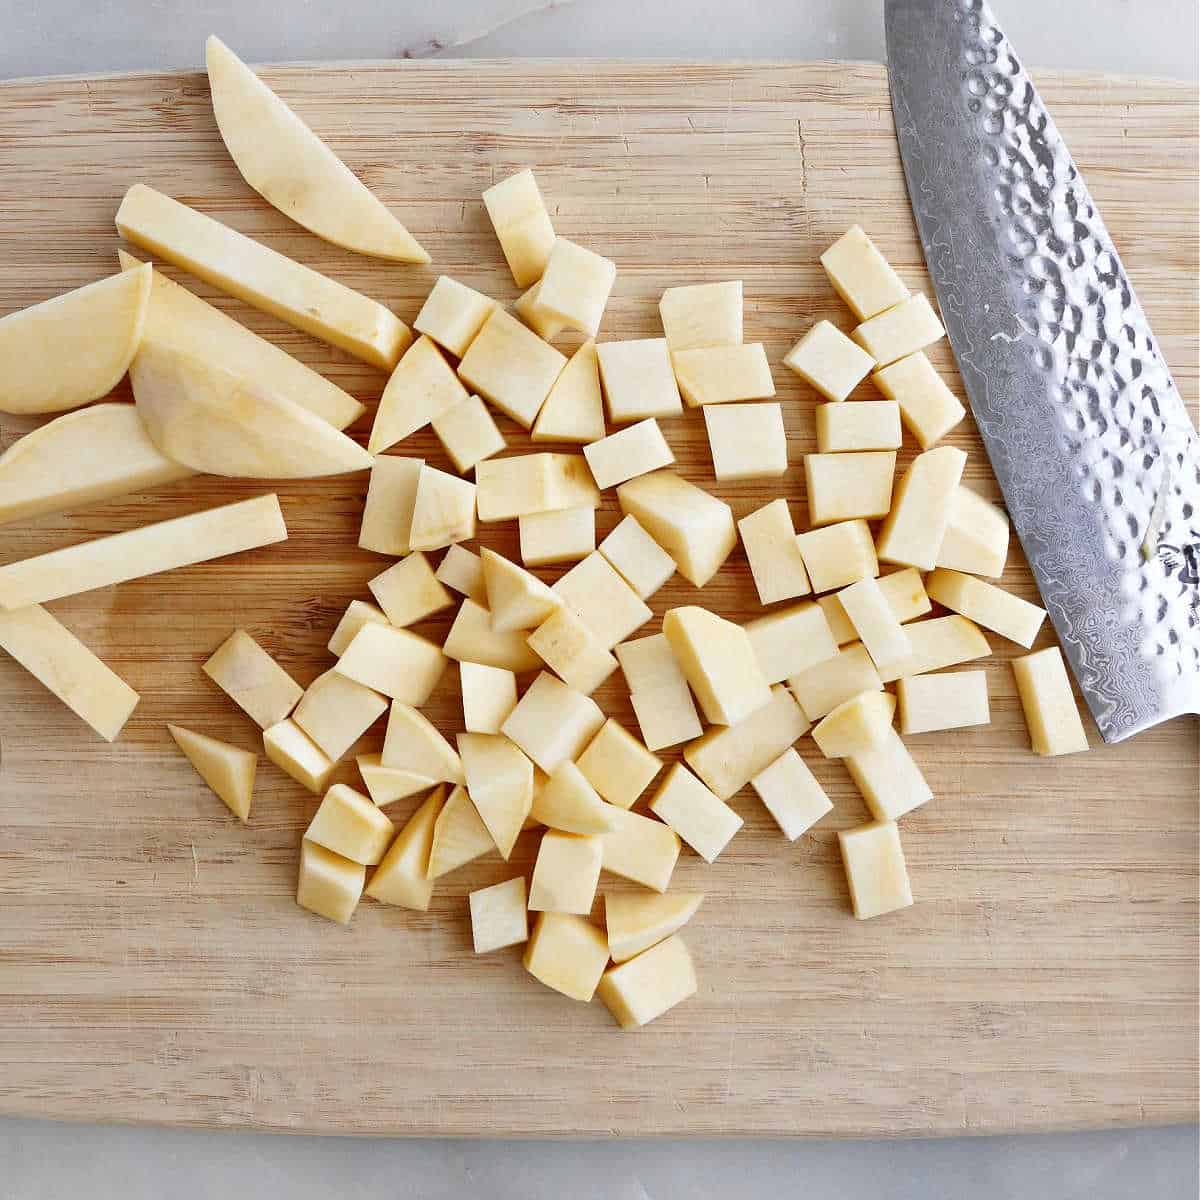 rutabaga being sliced into cubes with a knife on a cutting board